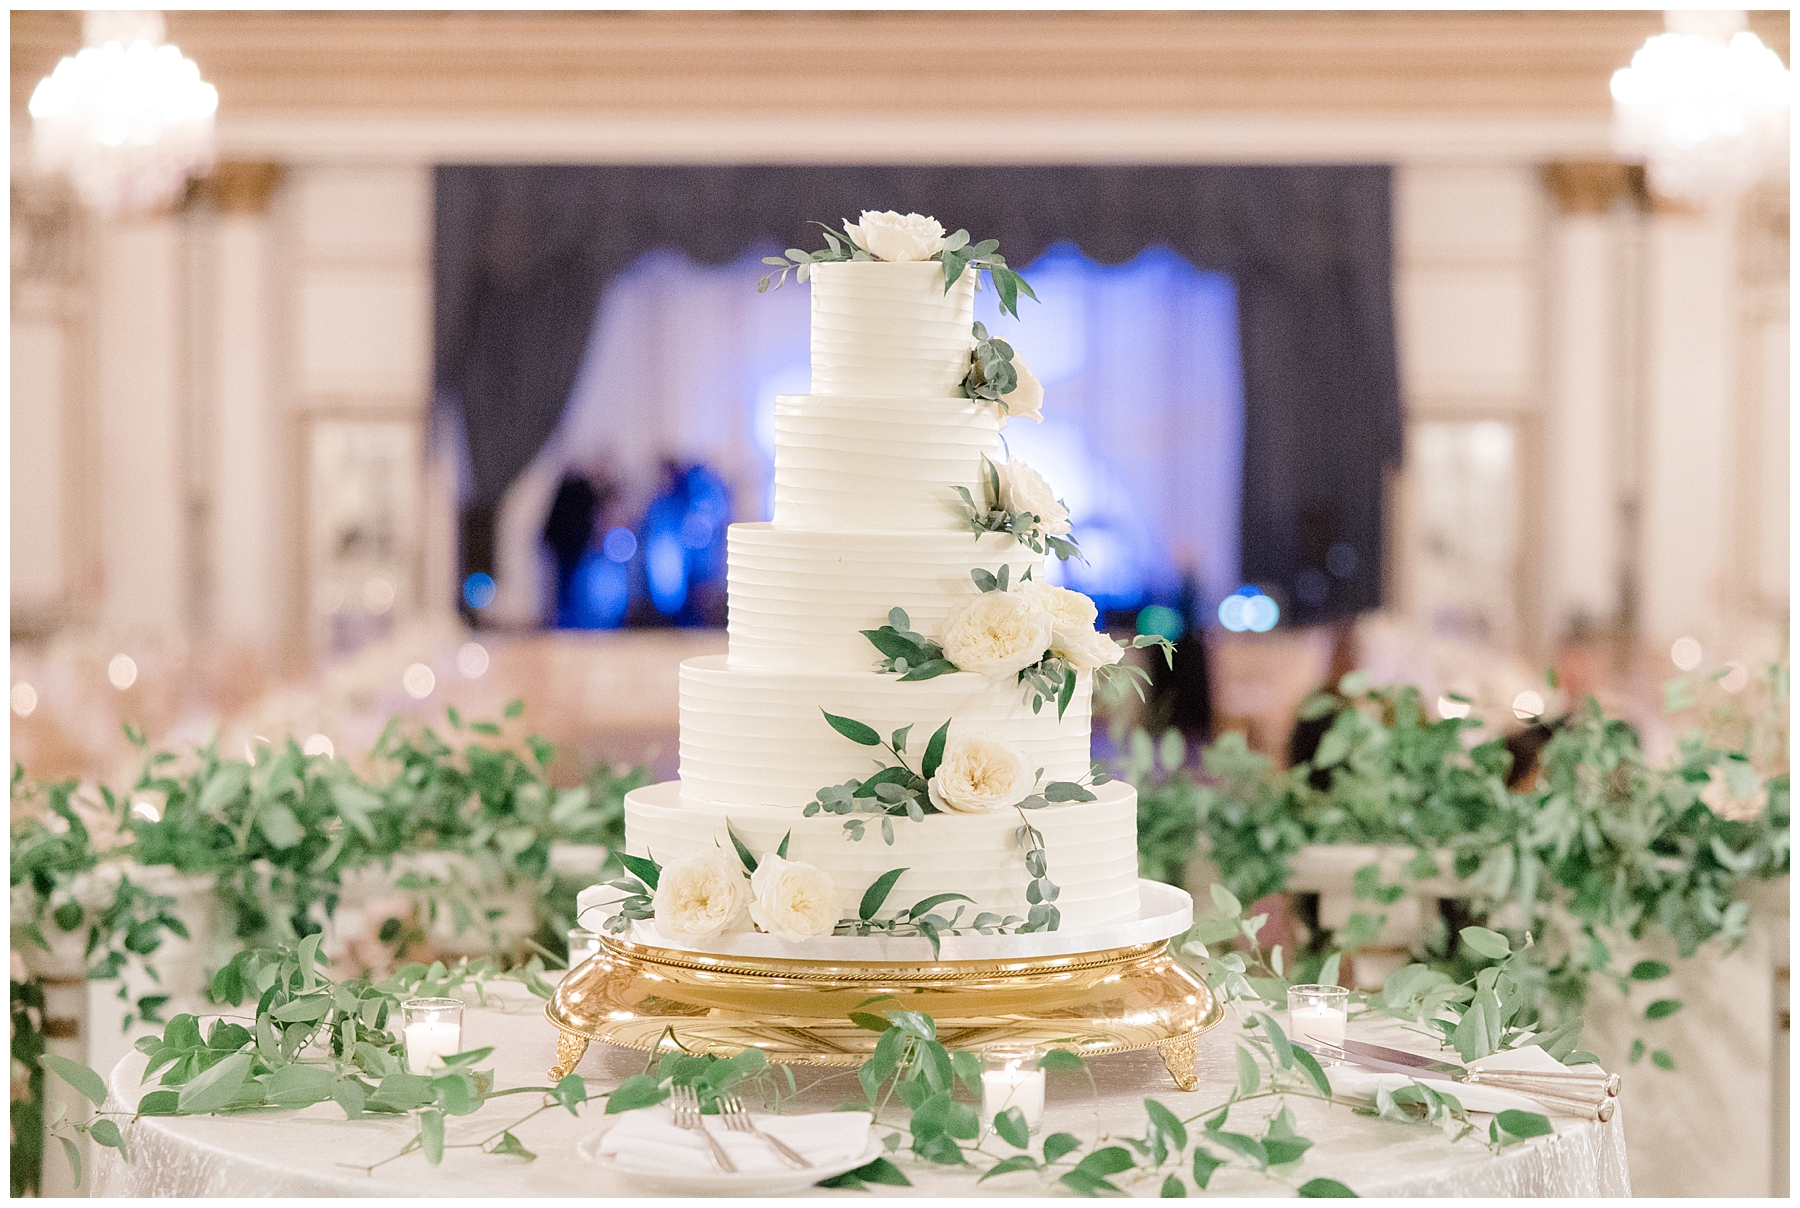 5 tired classic white wedding cake decorated with white flowers and surrounded by greenery